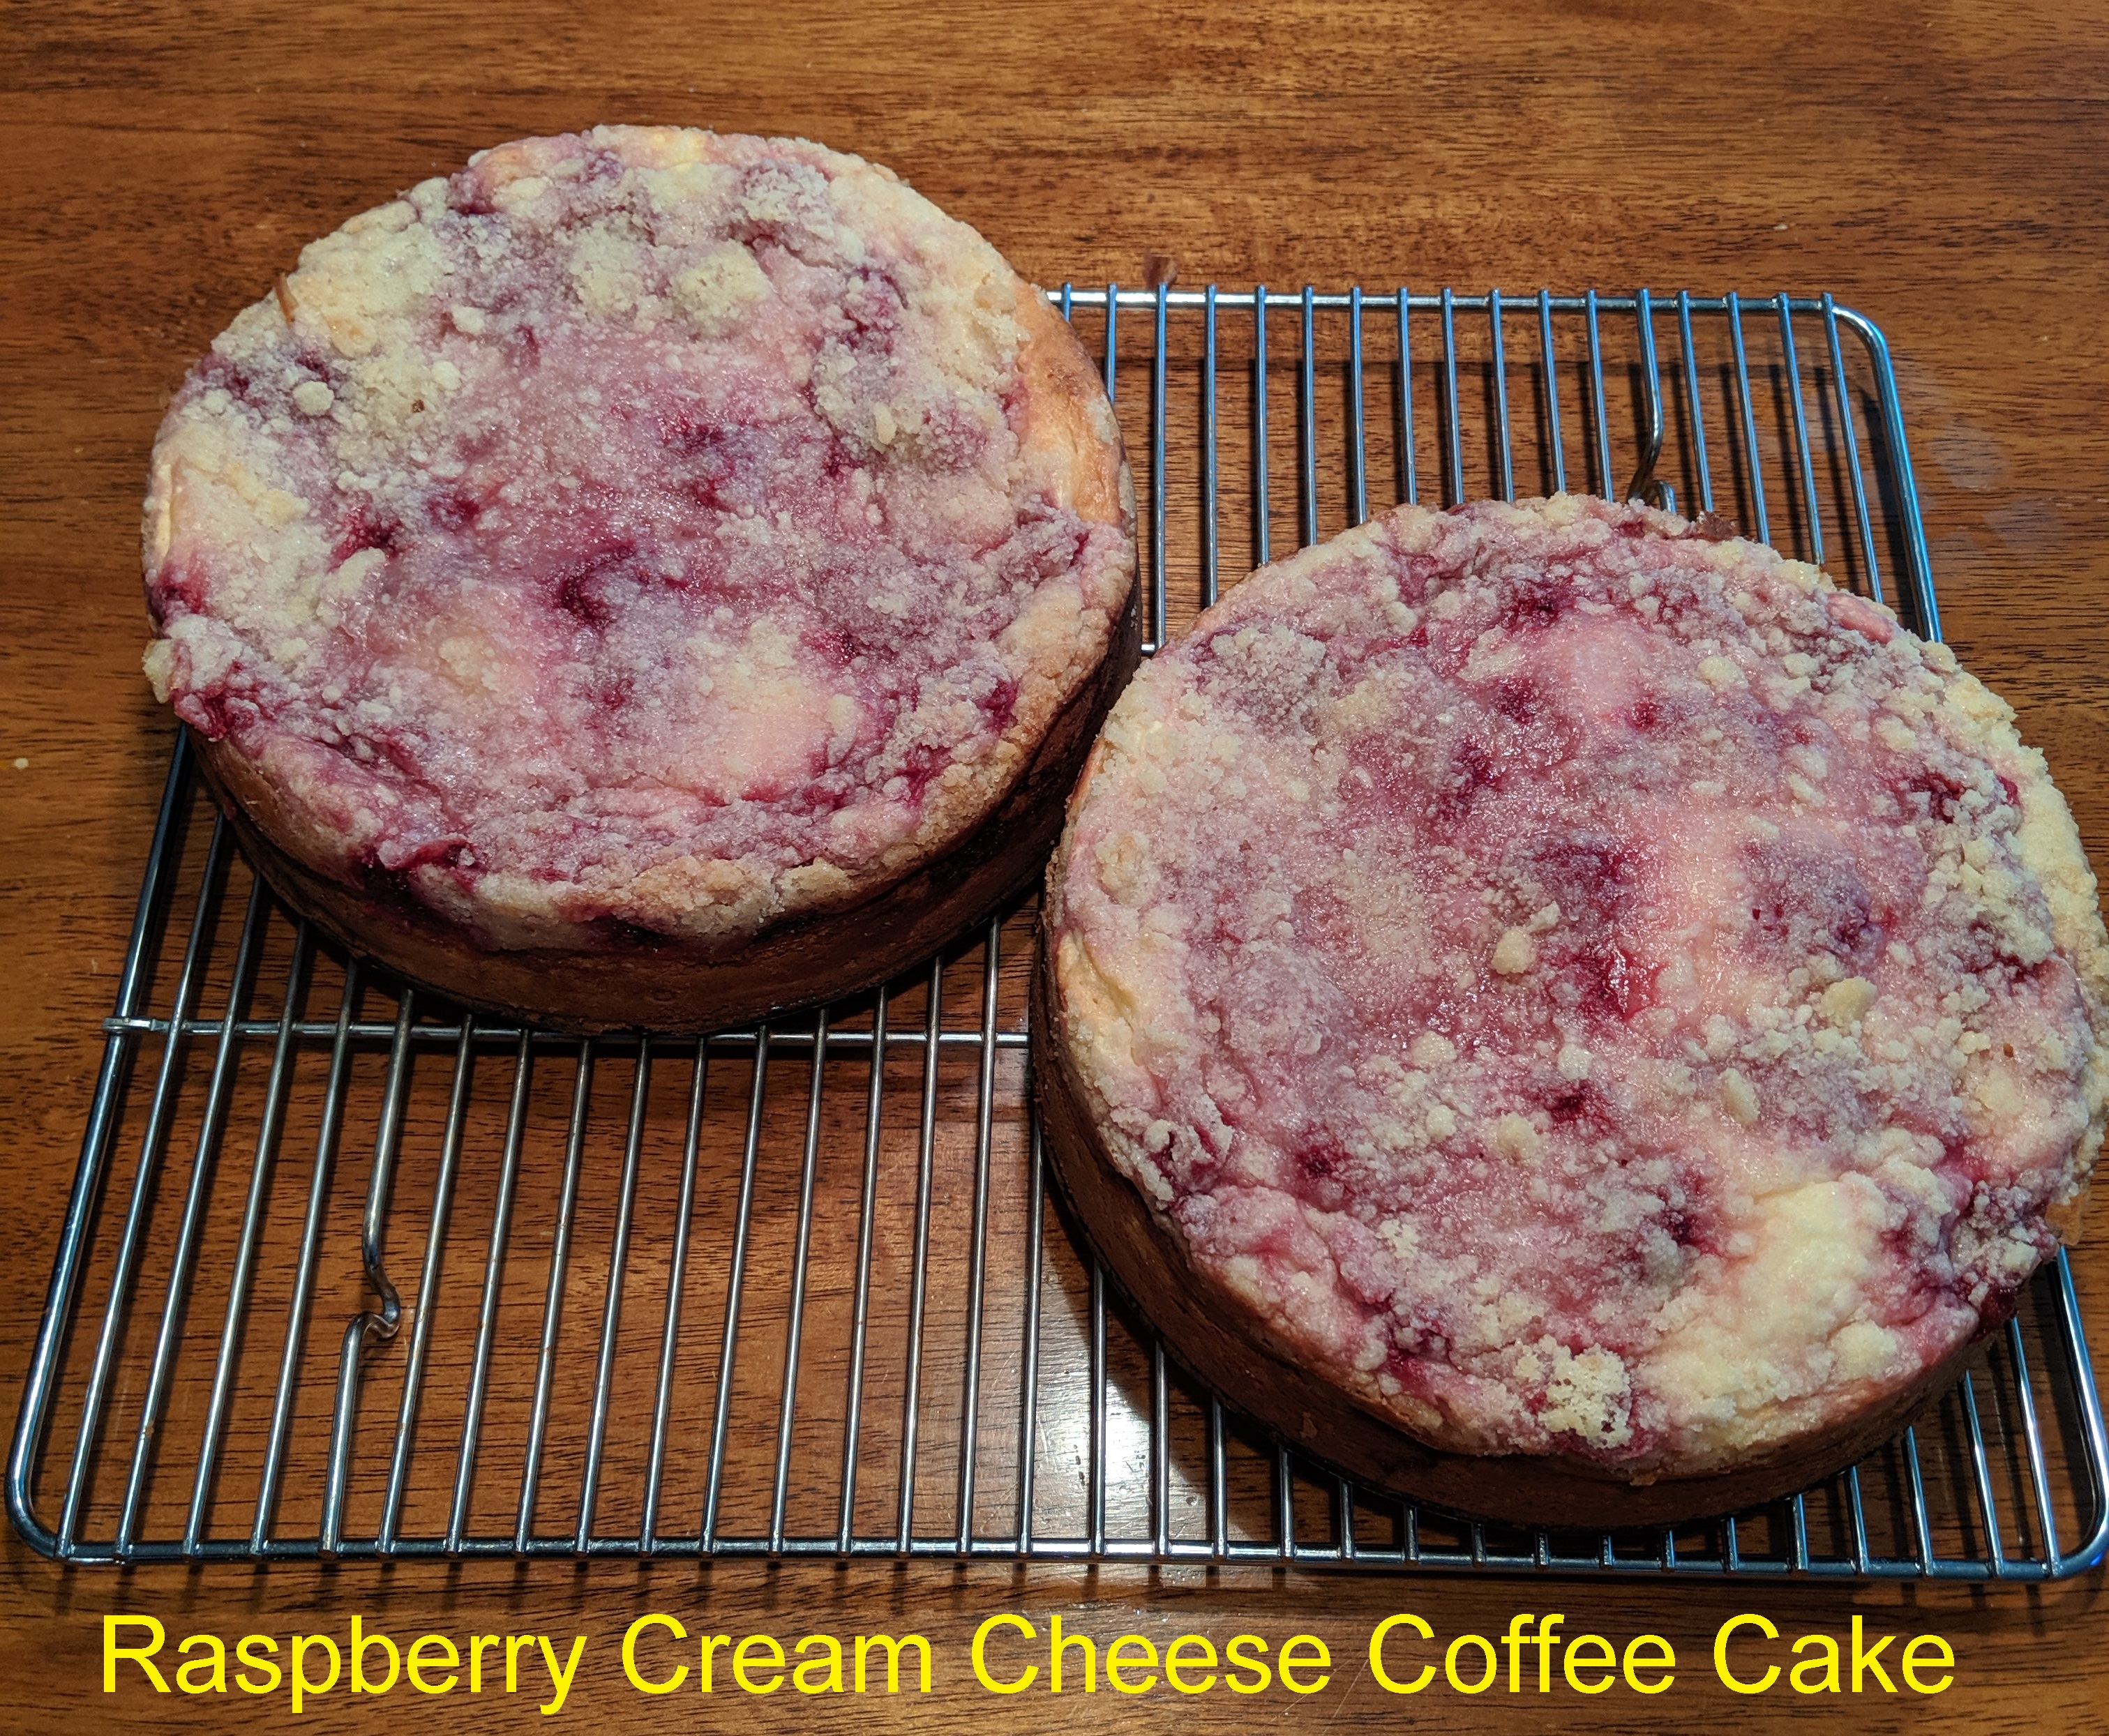 Chef Jimi Penti shares from his recipe collection: Raspberry Cream Cheese Coffee Cake